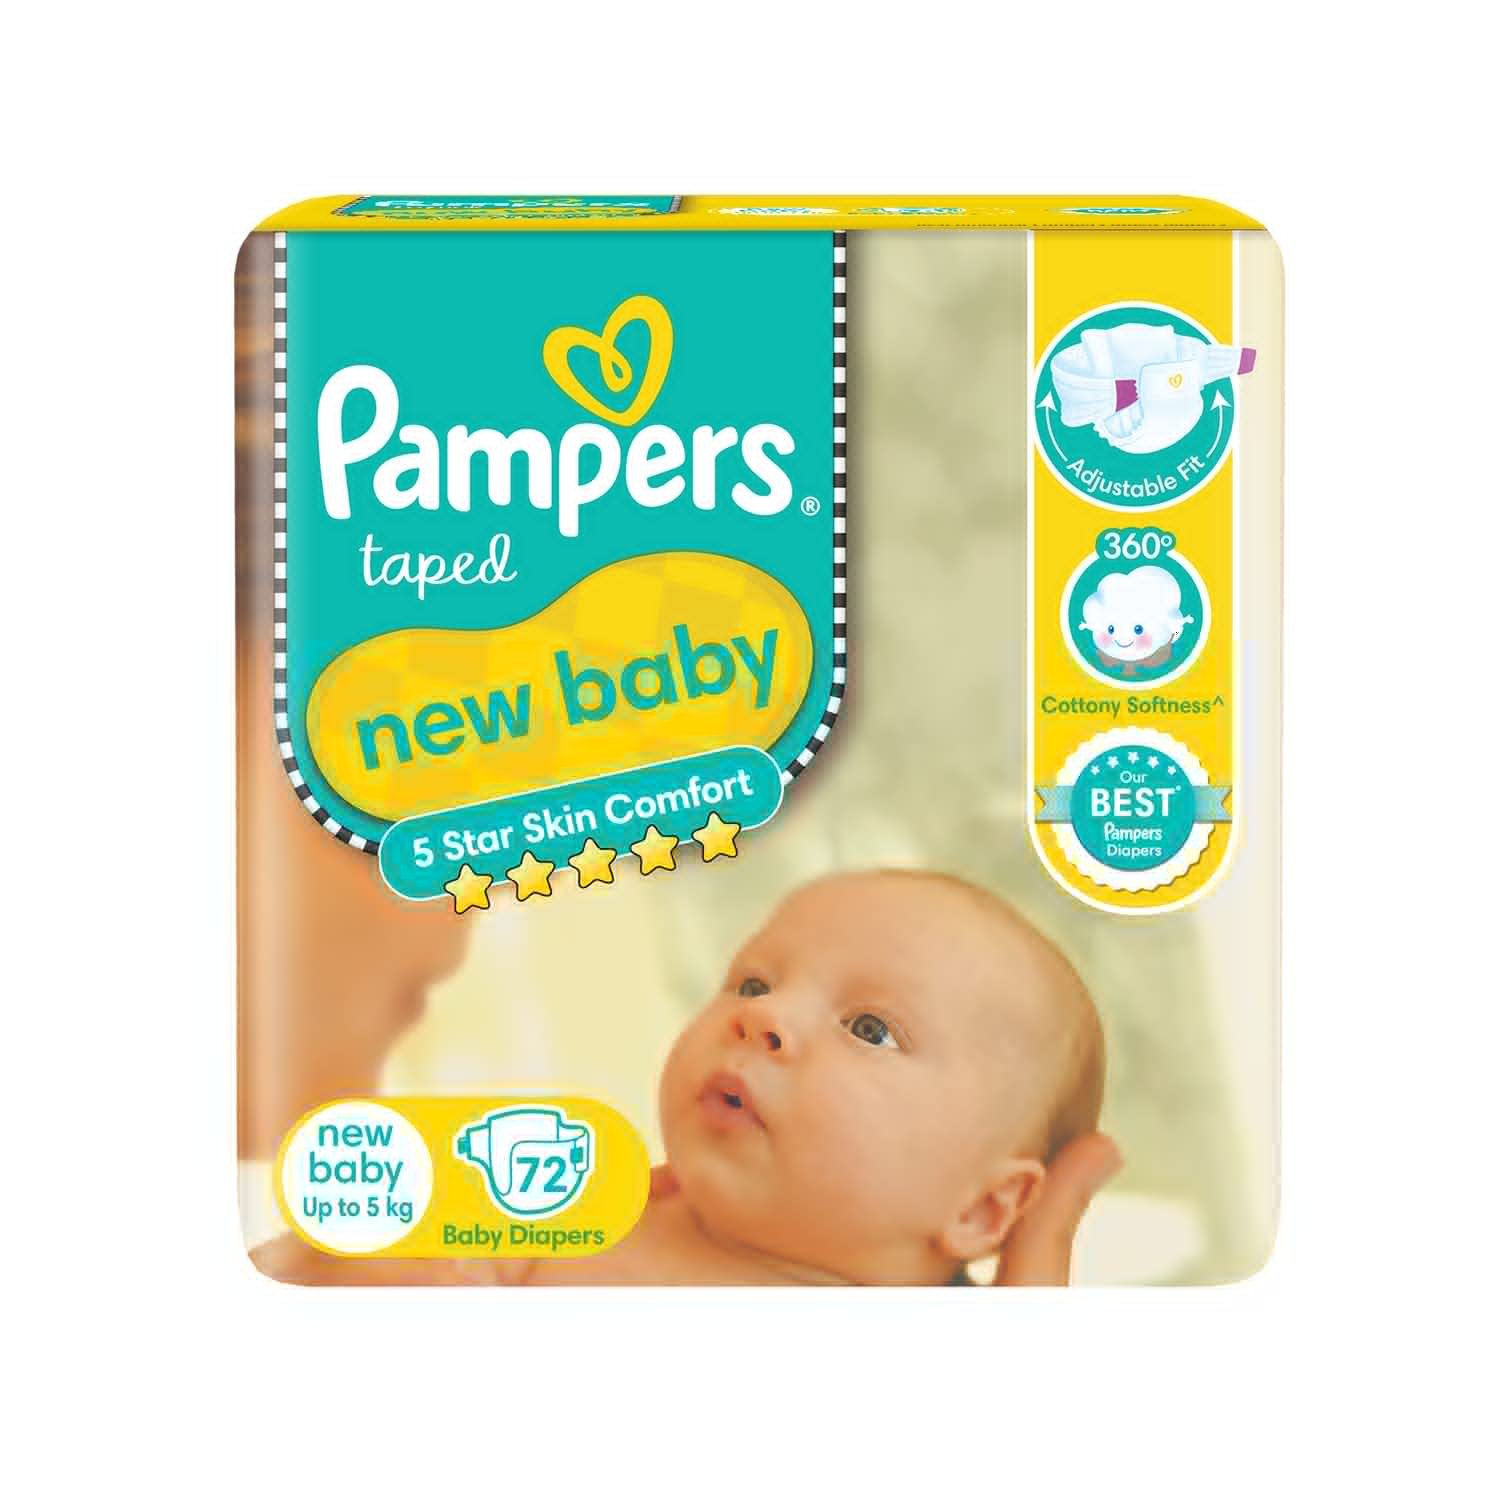 Pampers Pants Diapers For Newborn Baby 72 Counts